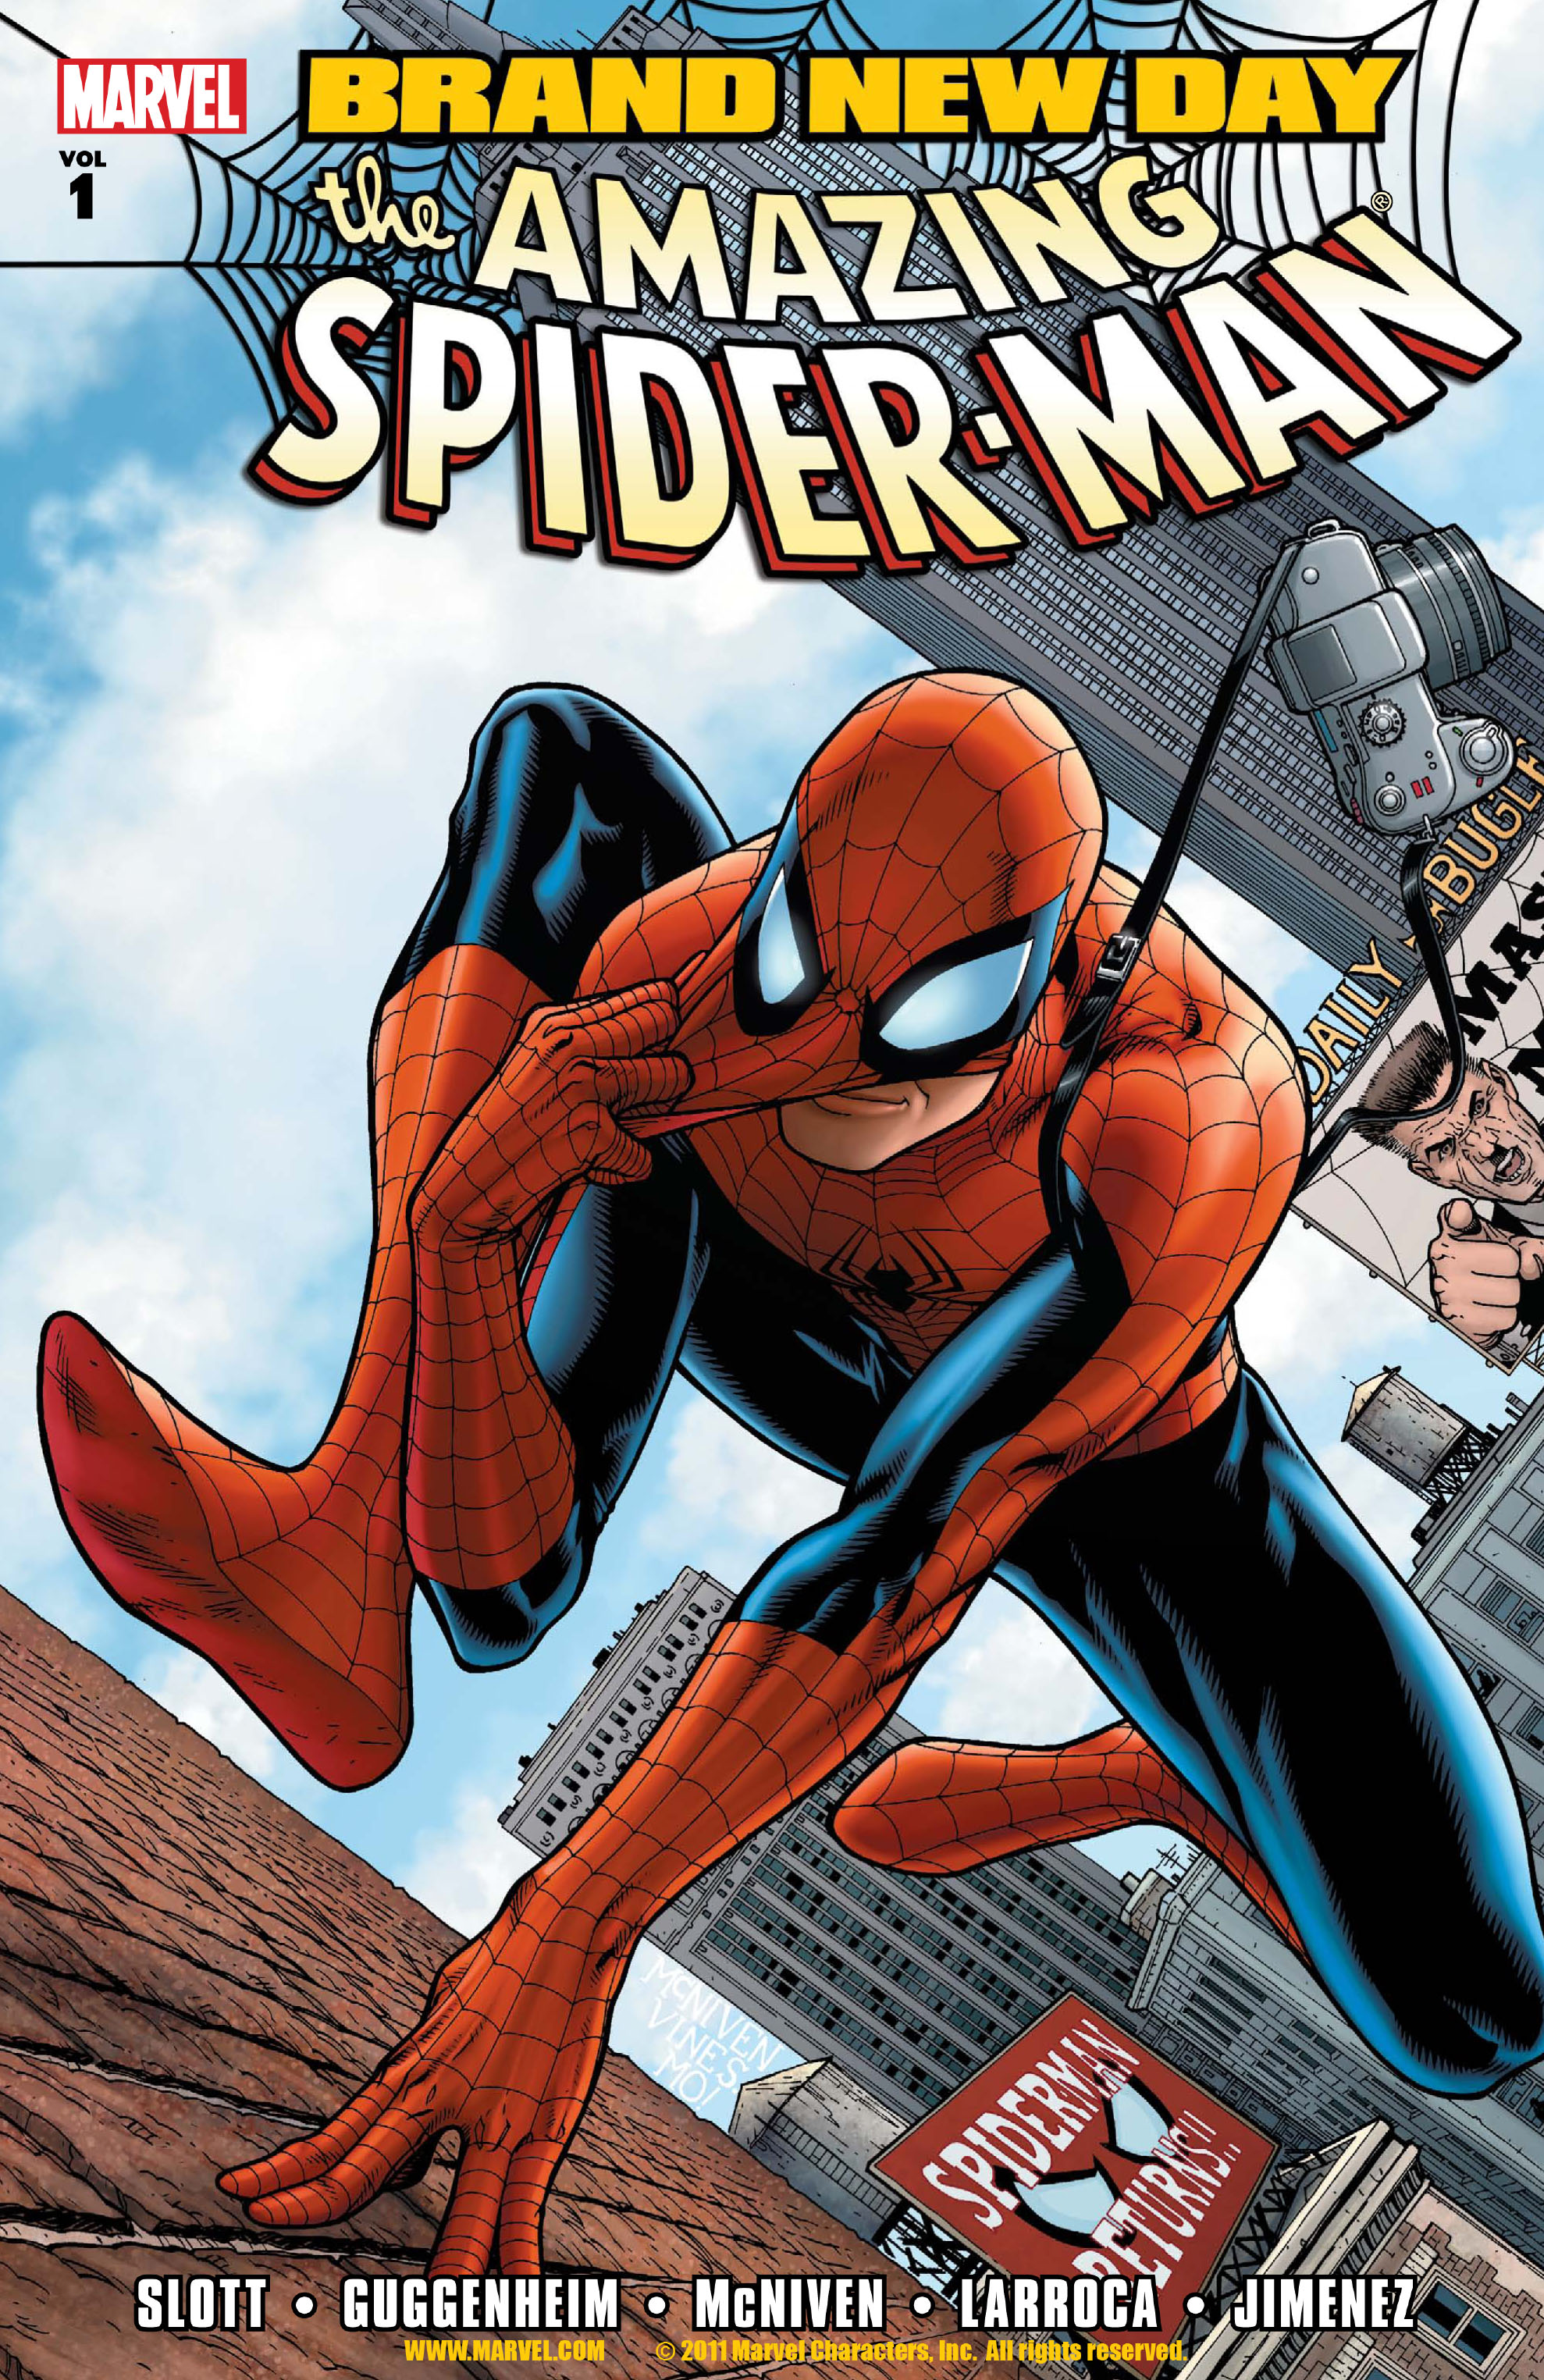 Read online Spider-Man: Brand New Day comic -  Issue # TPB - 1